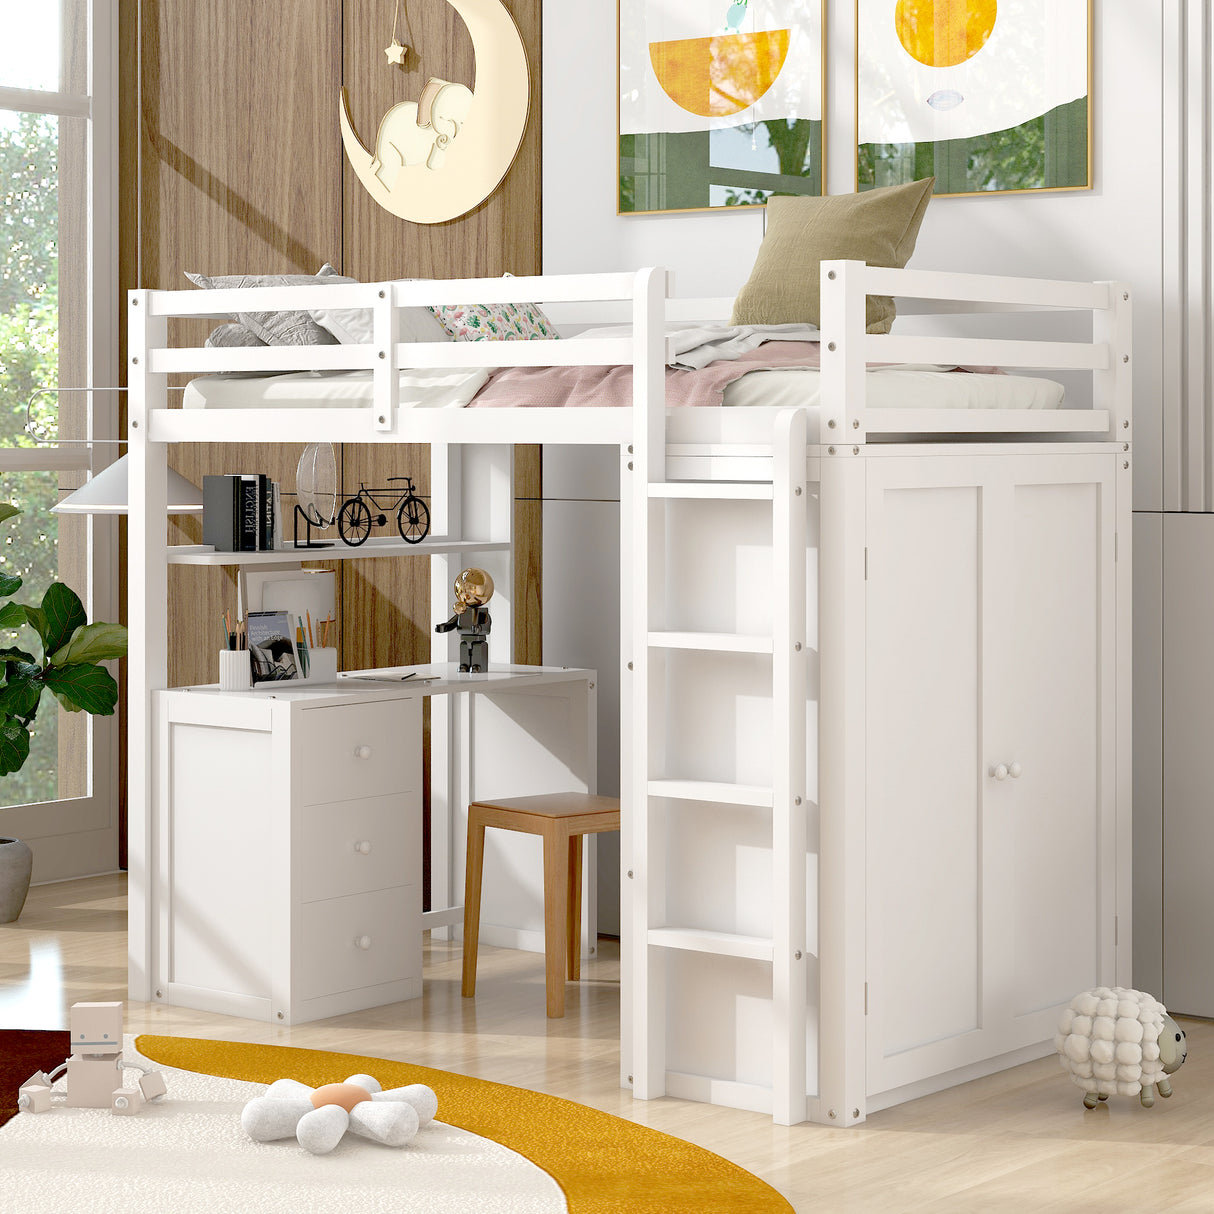 Twin size Loft Bed with Drawers,Desk,and Wardrobe-White - Home Elegance USA